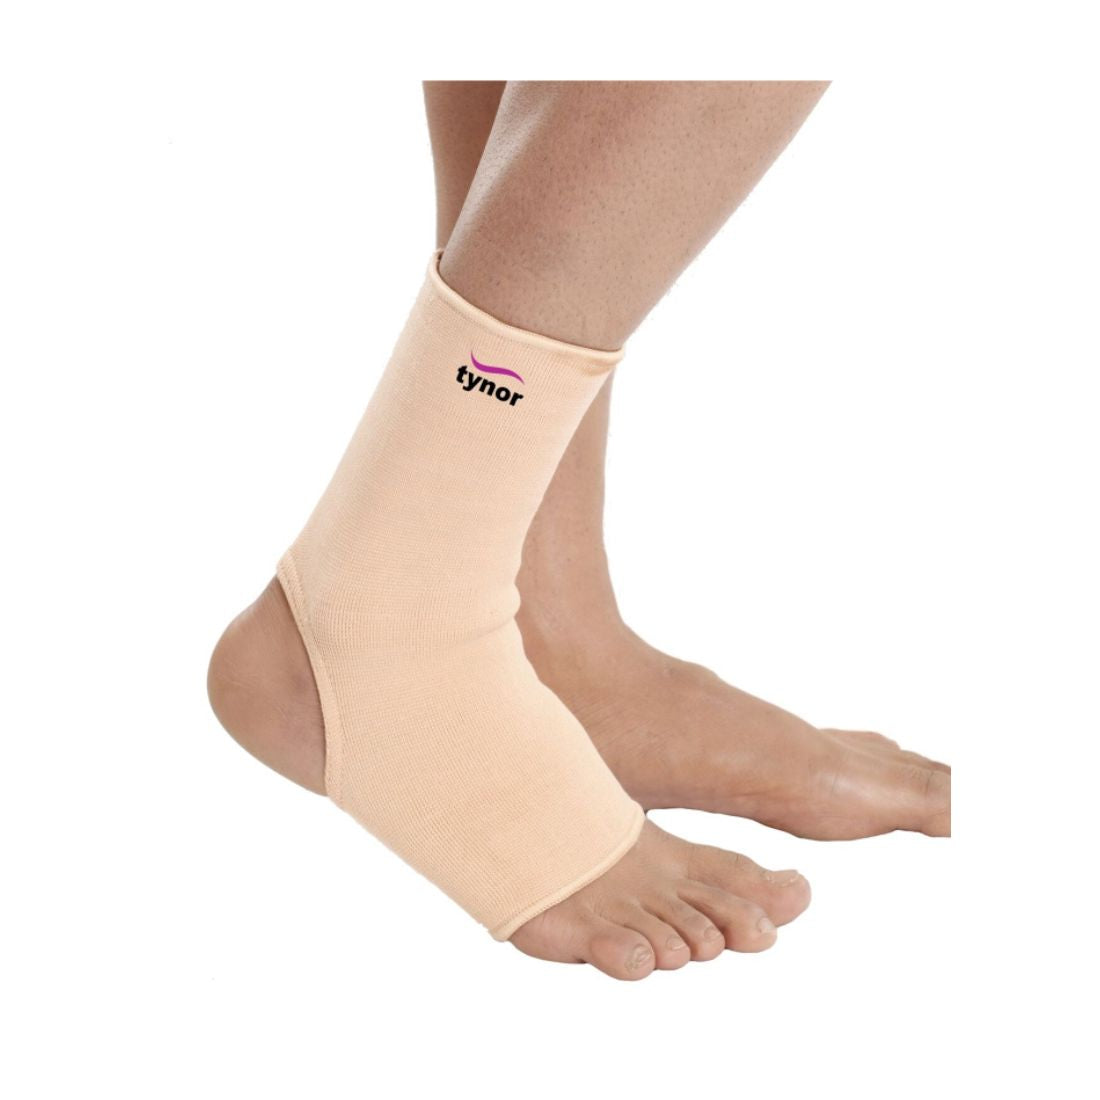 Tynor Anklet these types of brace are made of lightweight stretchable materials which allow normal rotation and movement of the ankle.